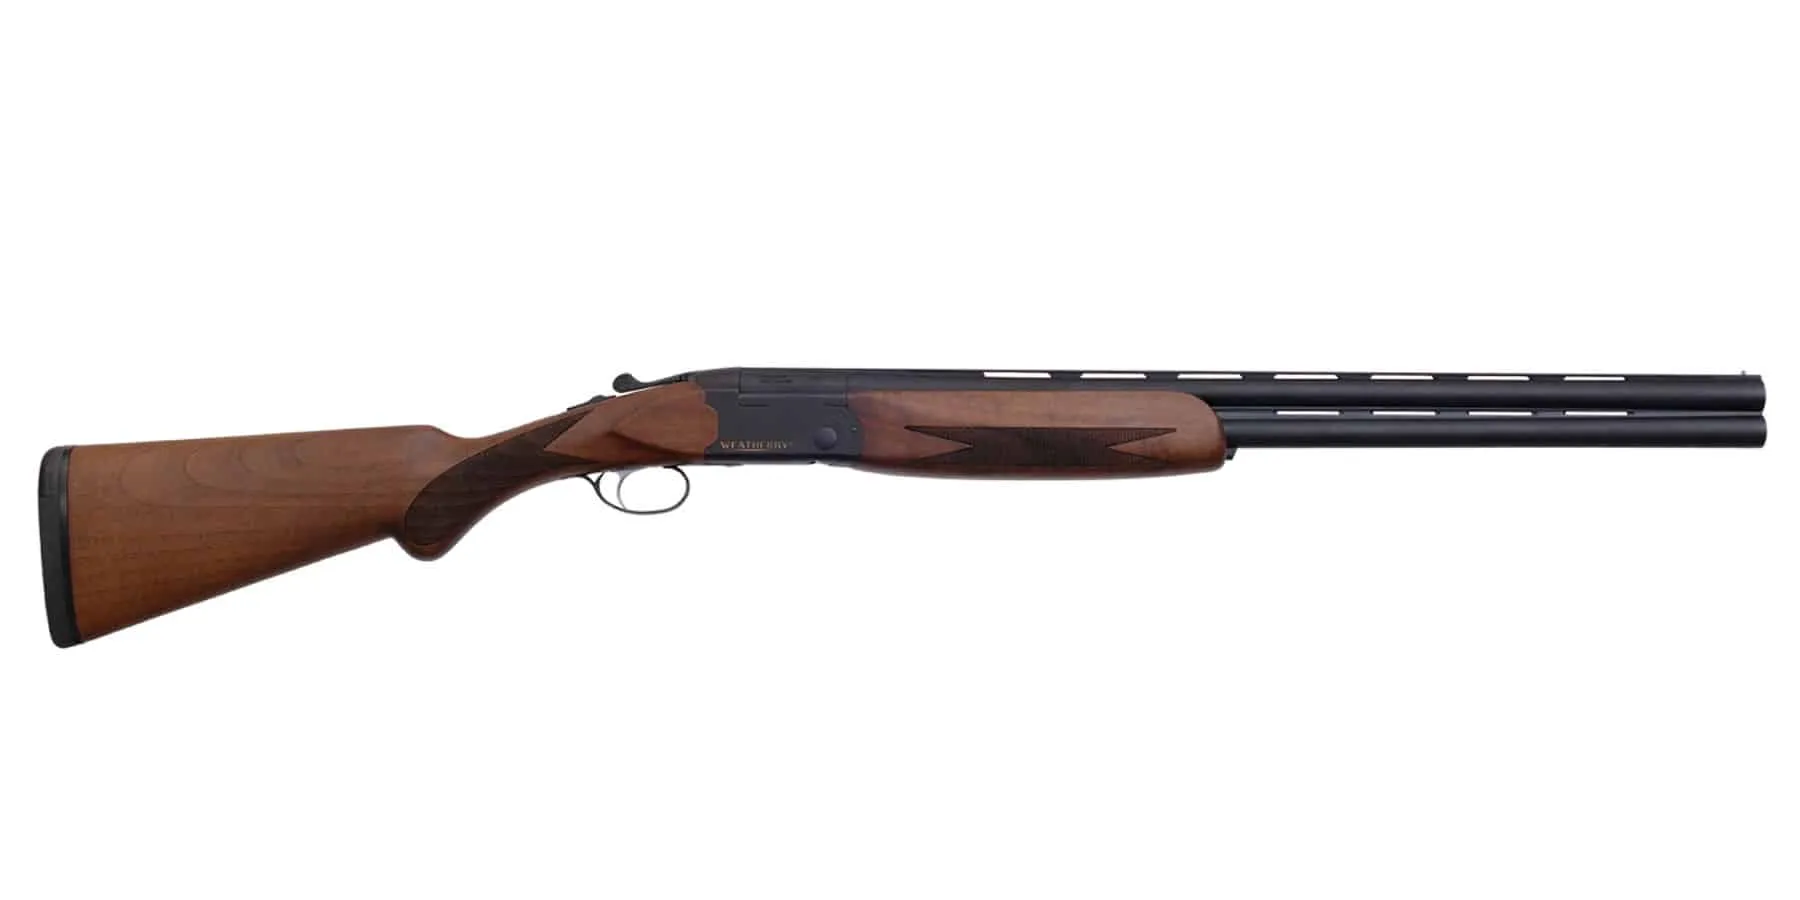 Weatherby Orion I